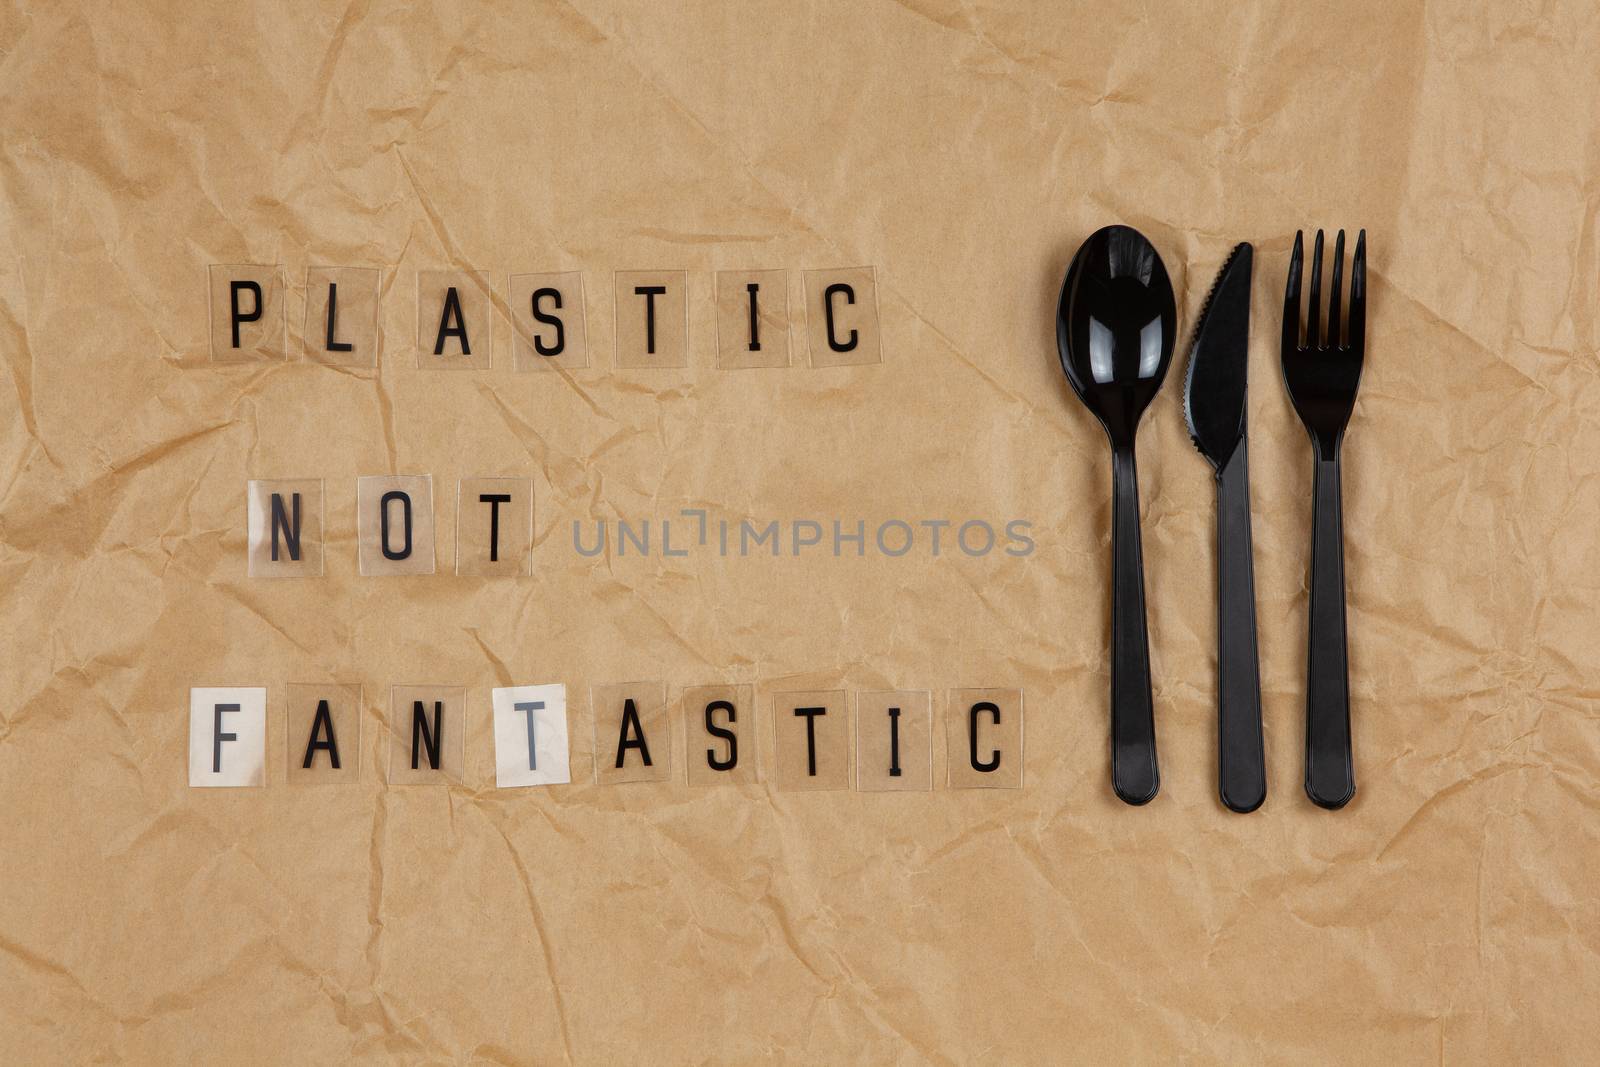 Disposable black appliances fork, spoon, knife, phrase from letters on transparent base Plastic not fantastic on brown crumpled craft paper. Eco, zero waste concept. Flat lay, top view. Horizontal by ALLUNEED